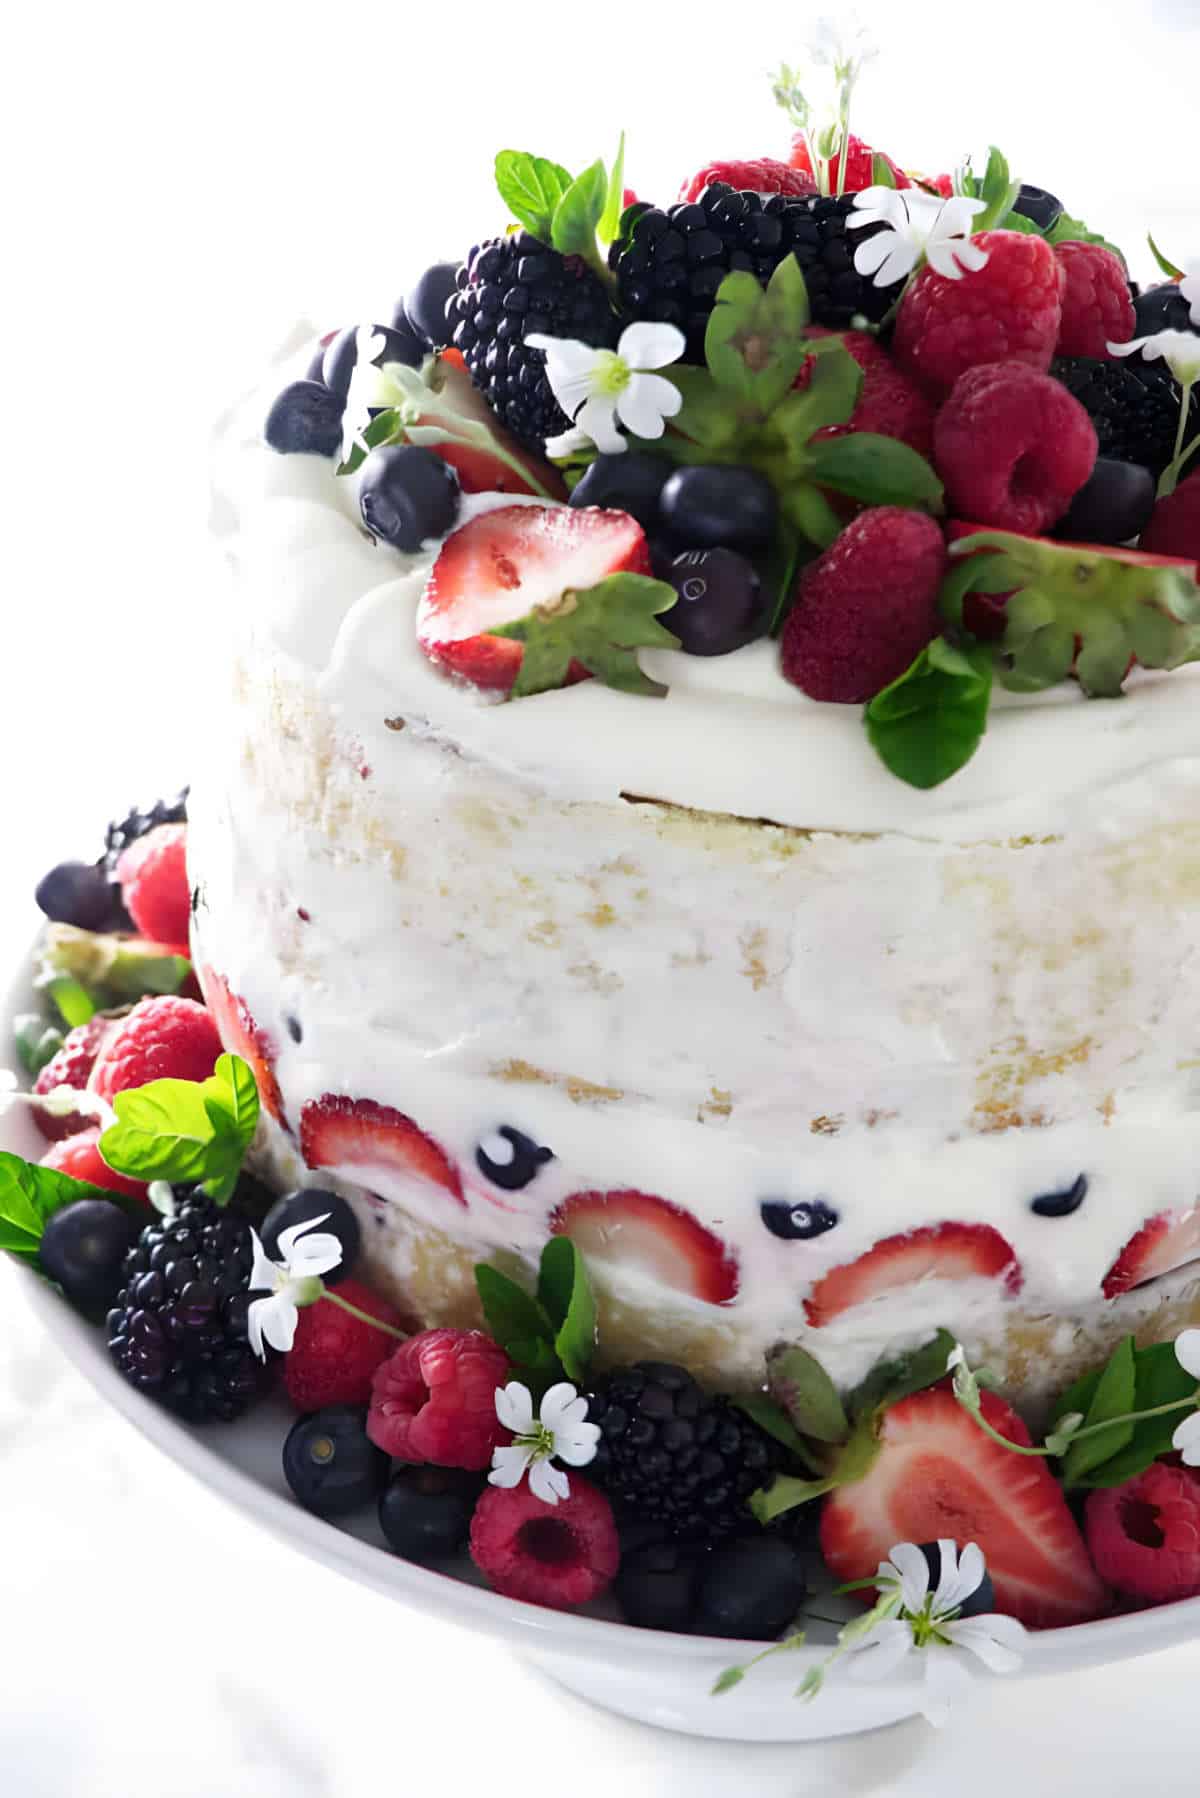 Chantilly cake on a pedestal strewn with fresh strawberries, blueberries, and raspberries.